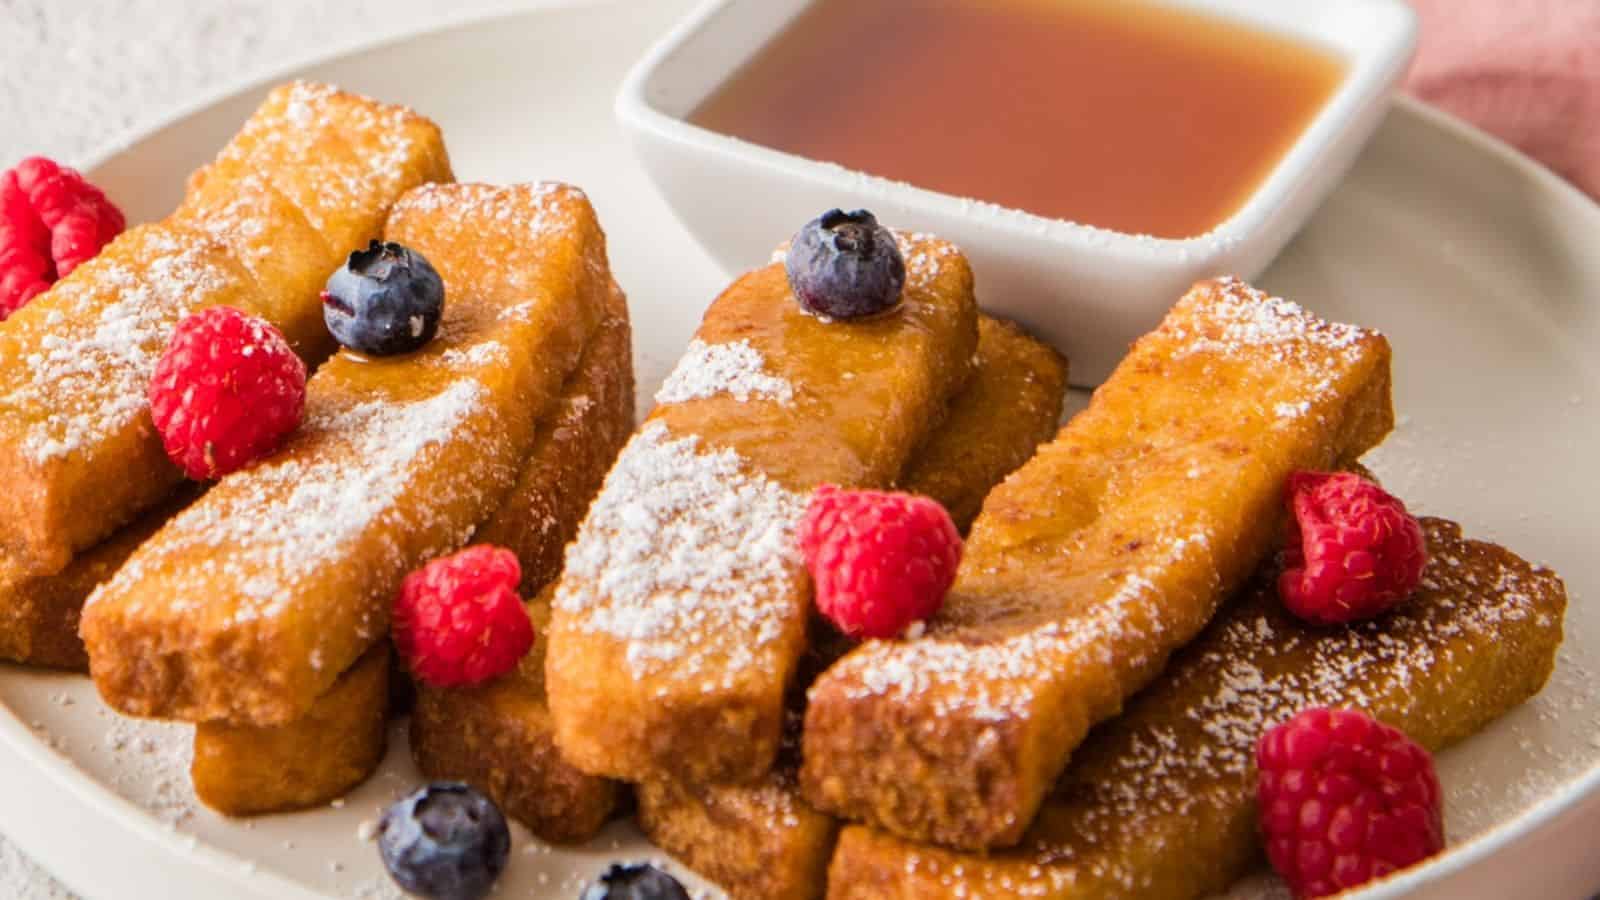 A plate of golden brown French toast sticks dusted with powdered sugar, garnished with raspberries and blueberries.